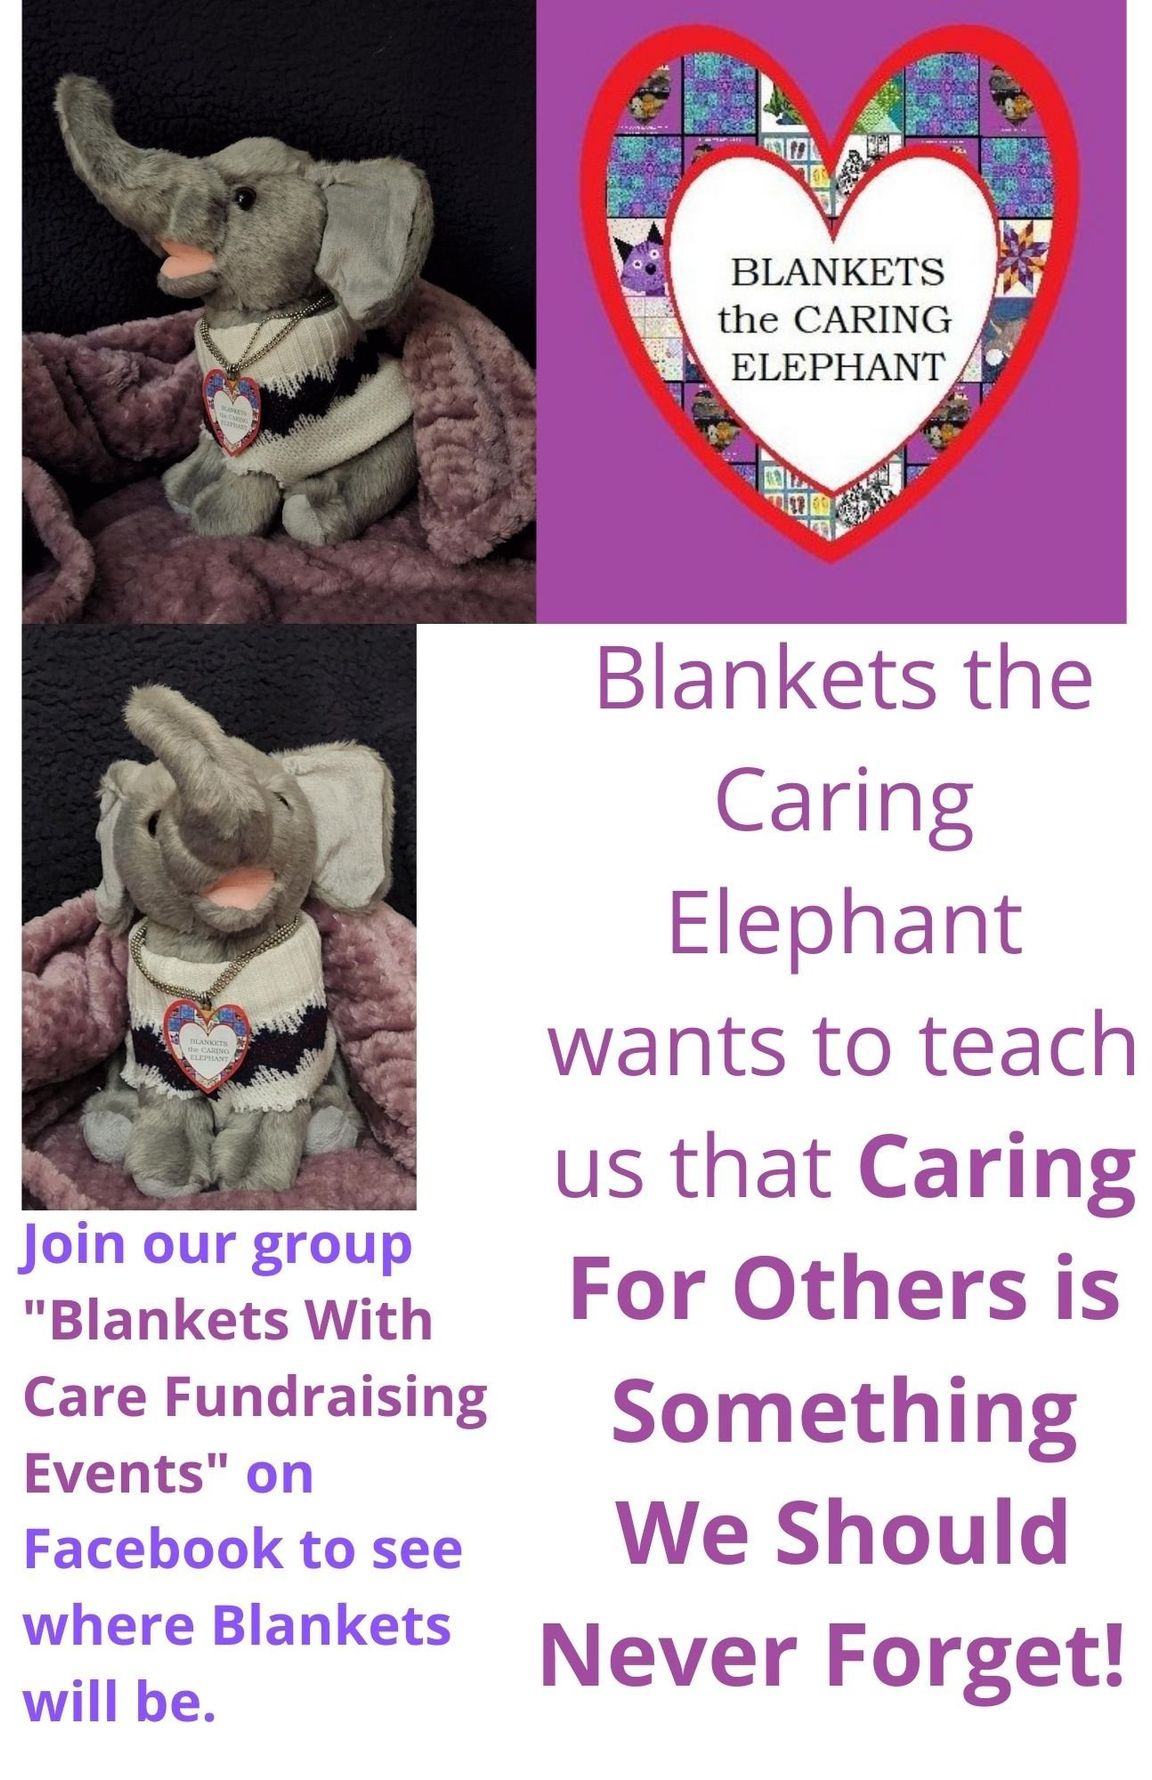 Blankets the caring elephant wants to teach us that caring for others is something we should never forget.